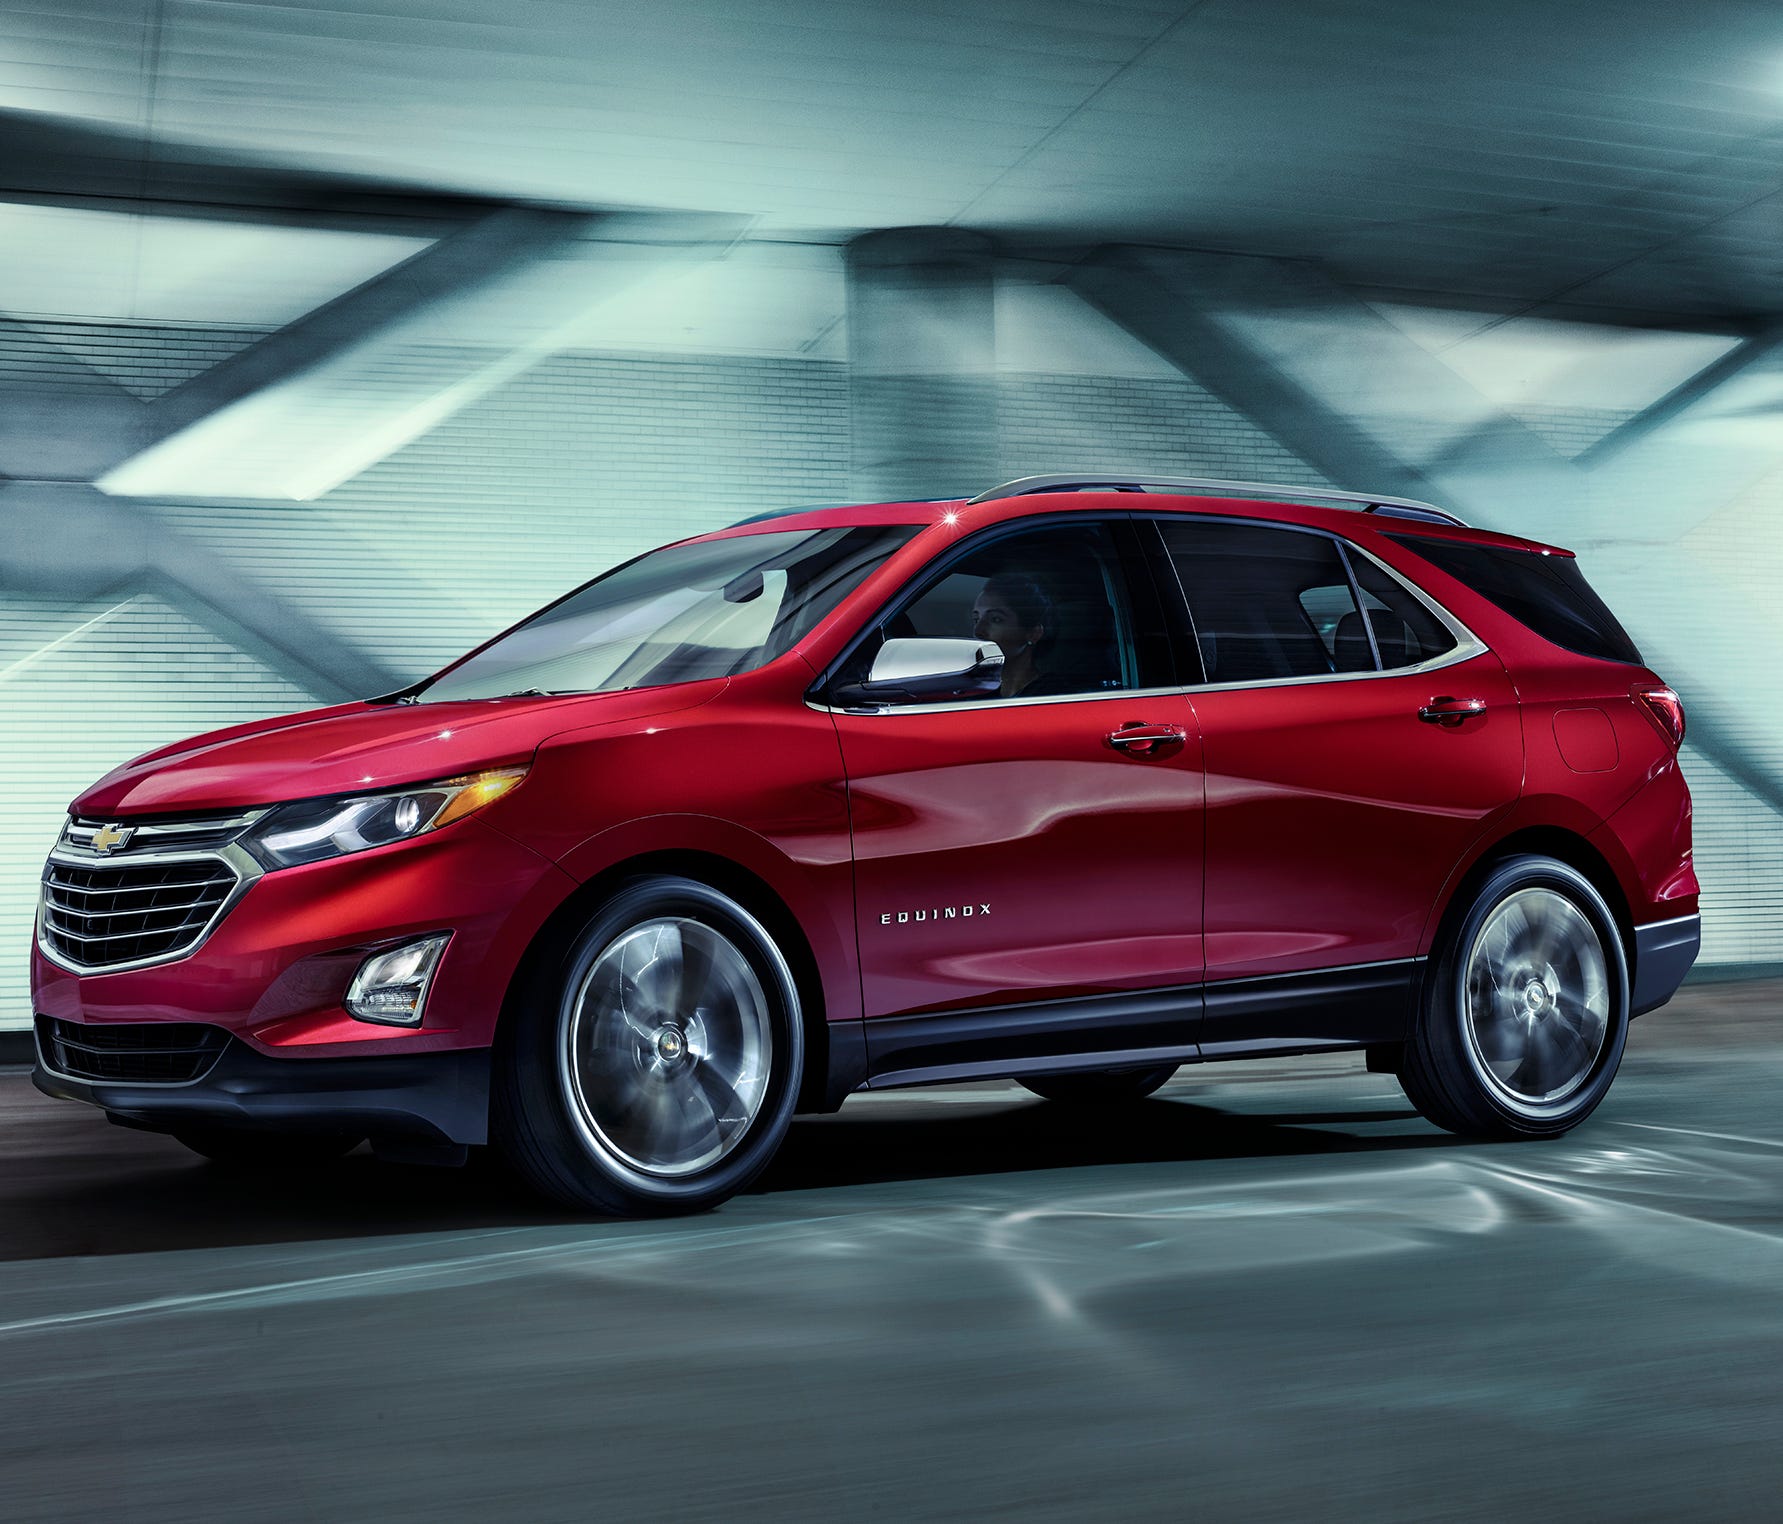 The new 2018 Chevrolet Equinox was made smaller and lighter but is still capable